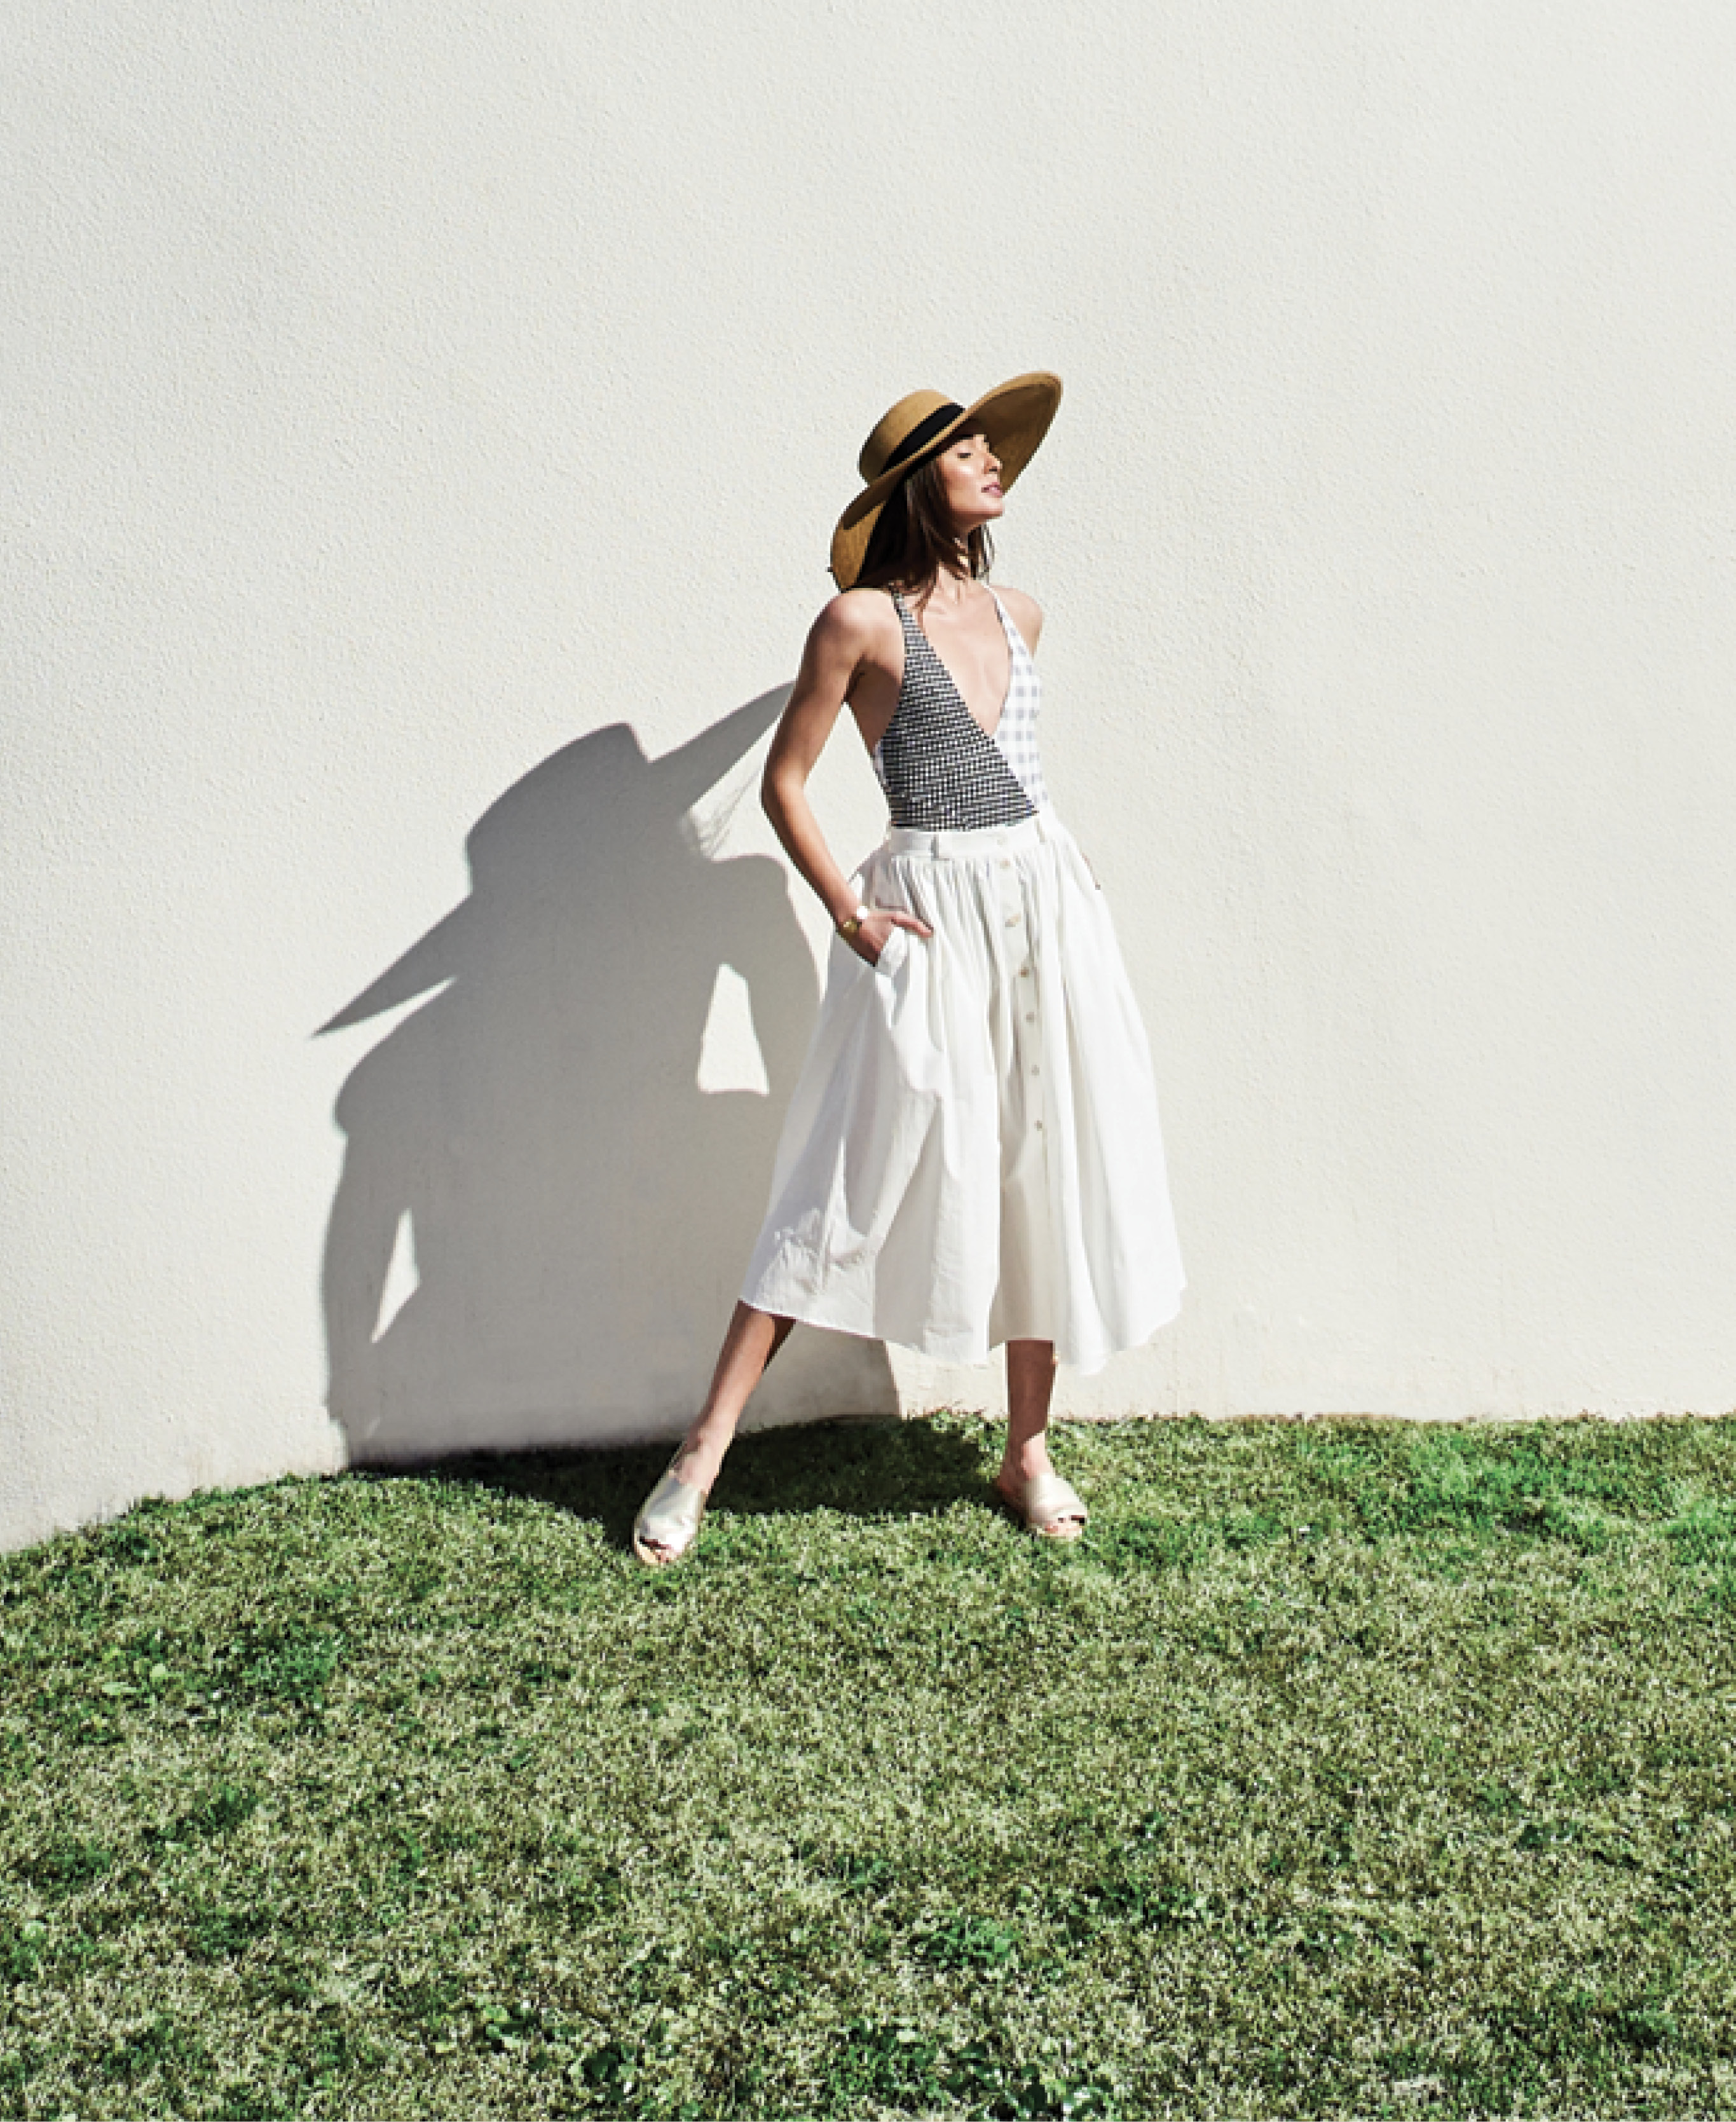 SUIT UP - Marysia “Suffolk Maillot,” $359 at Everything But Water; Brock Collection cotton “Olivo” button-up skirt, price upon request at RTW; Gretchen Scott sun hat, $59 at Gretchen Scott; Kendra Scott “Tenley” 14K gold-plate cuff, $95 at Kendra Scott; Sam Edelman “Andy” leather slide in “light gold,” $90 at Shoes on King